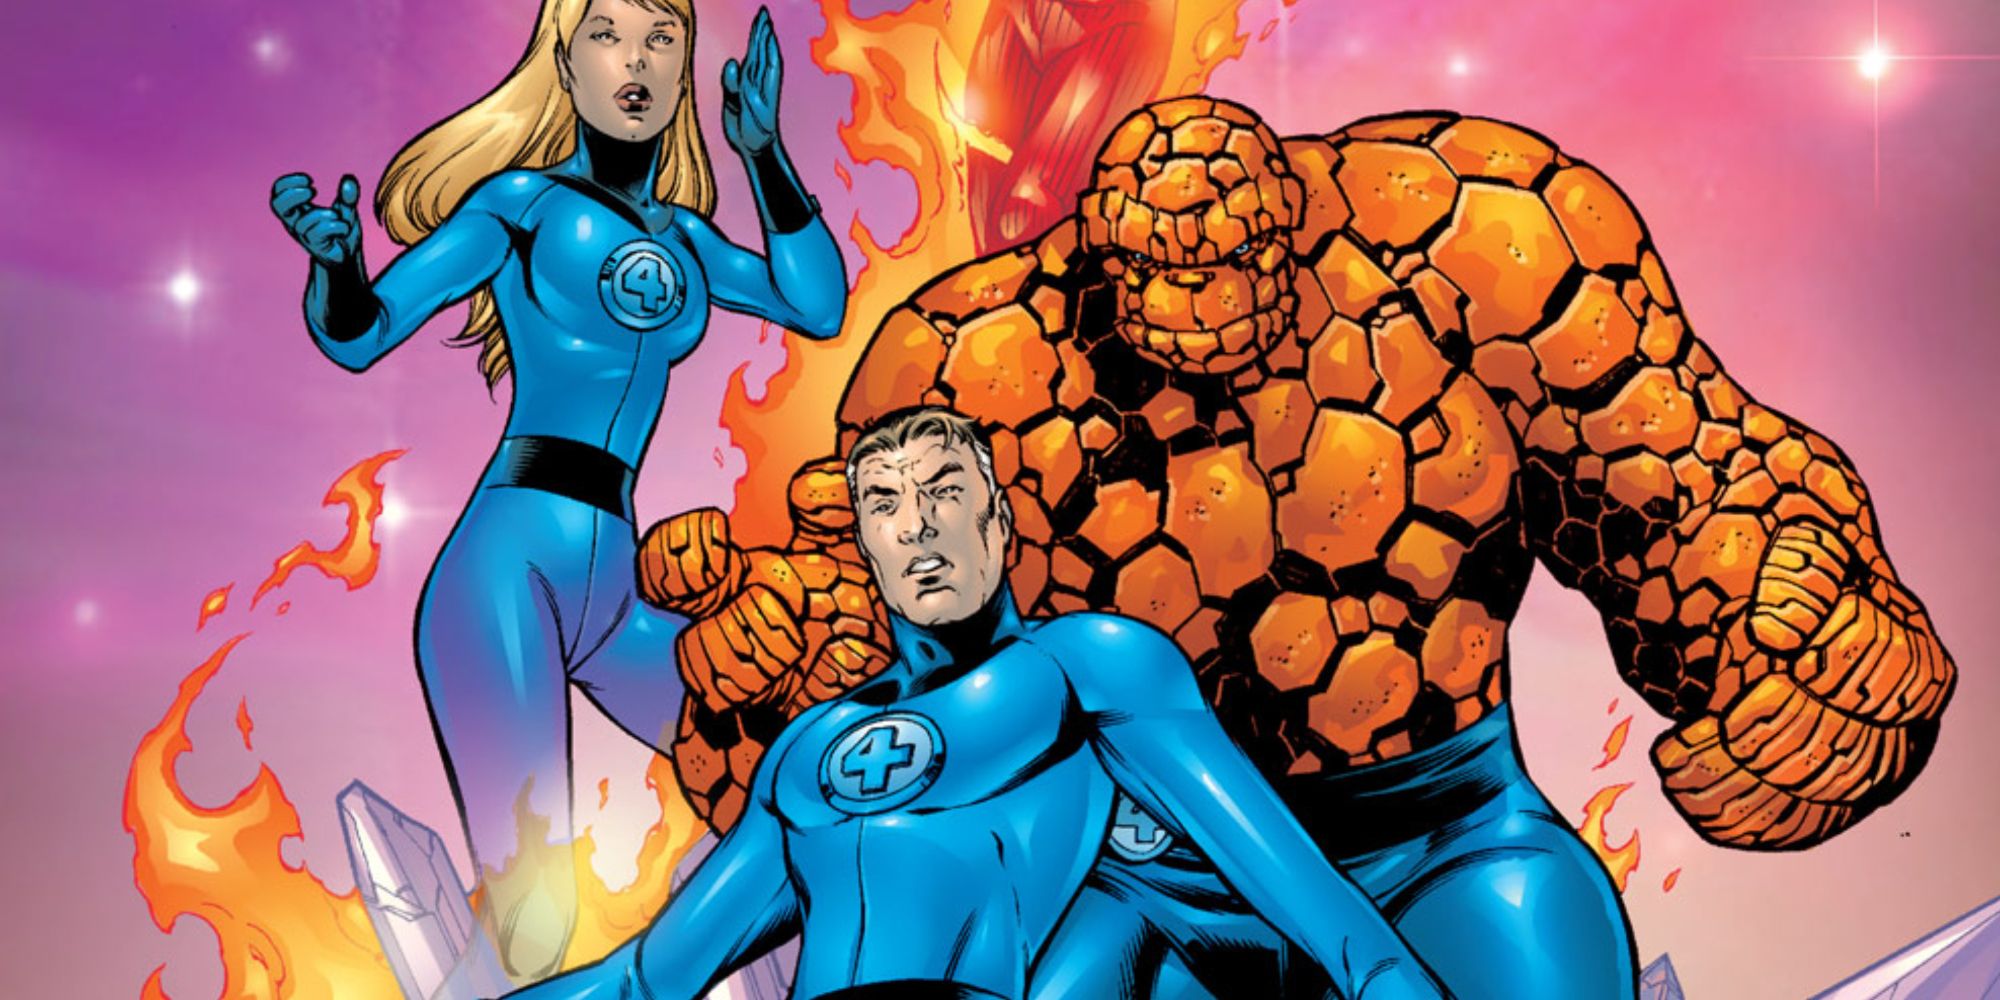 The Fantastic Four appear in art by Carlos Pacheco.